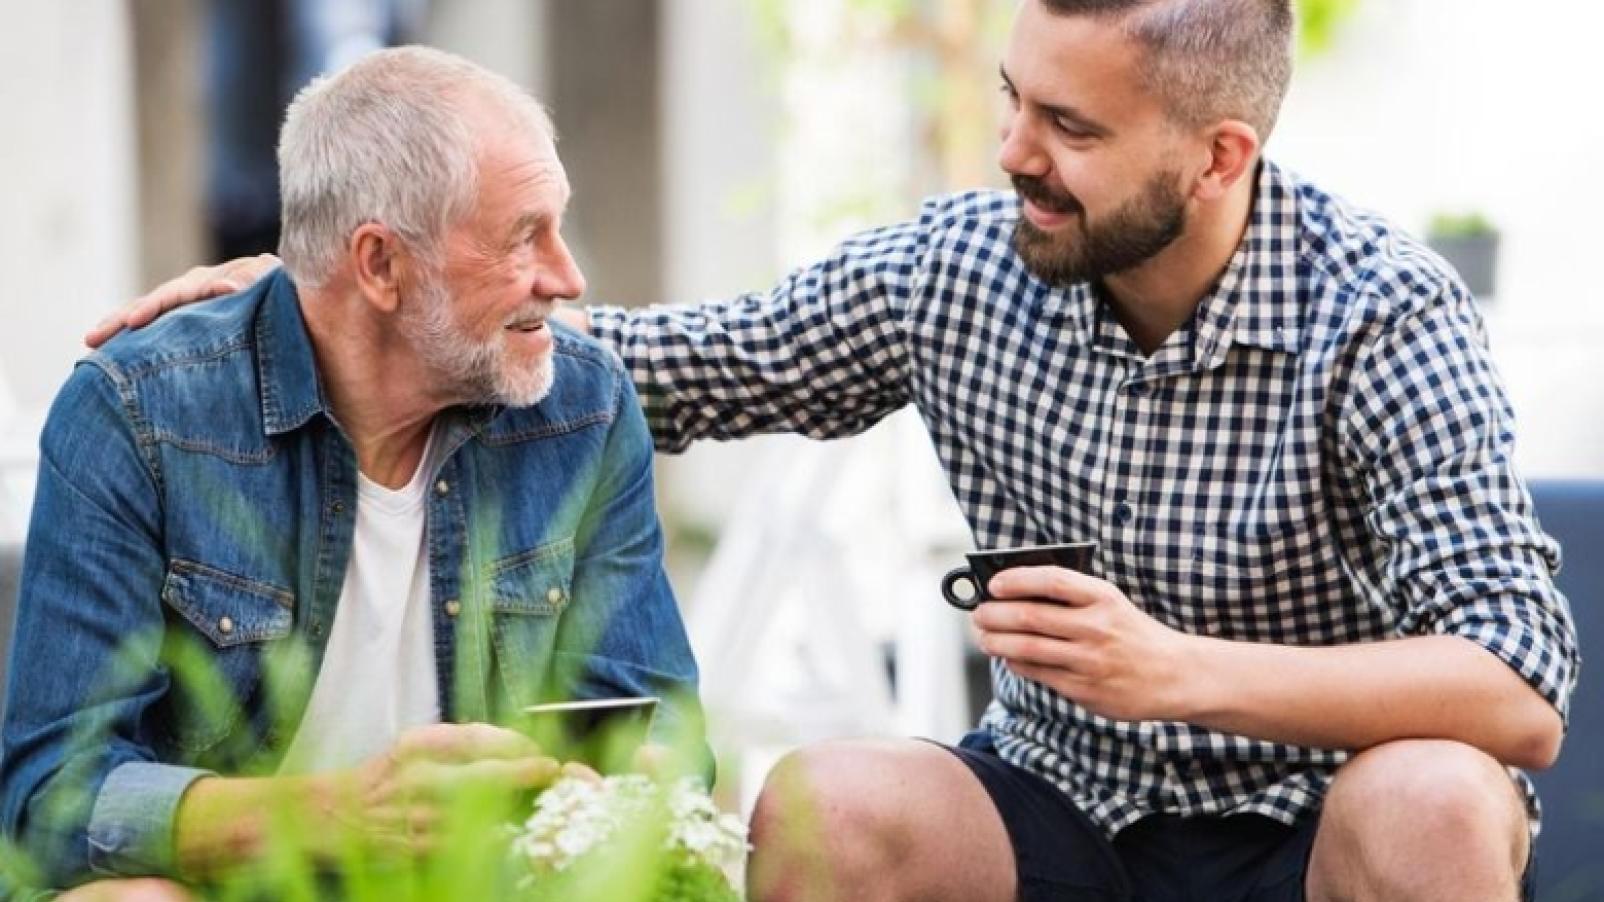 carer chatting to elderly man in the backyard